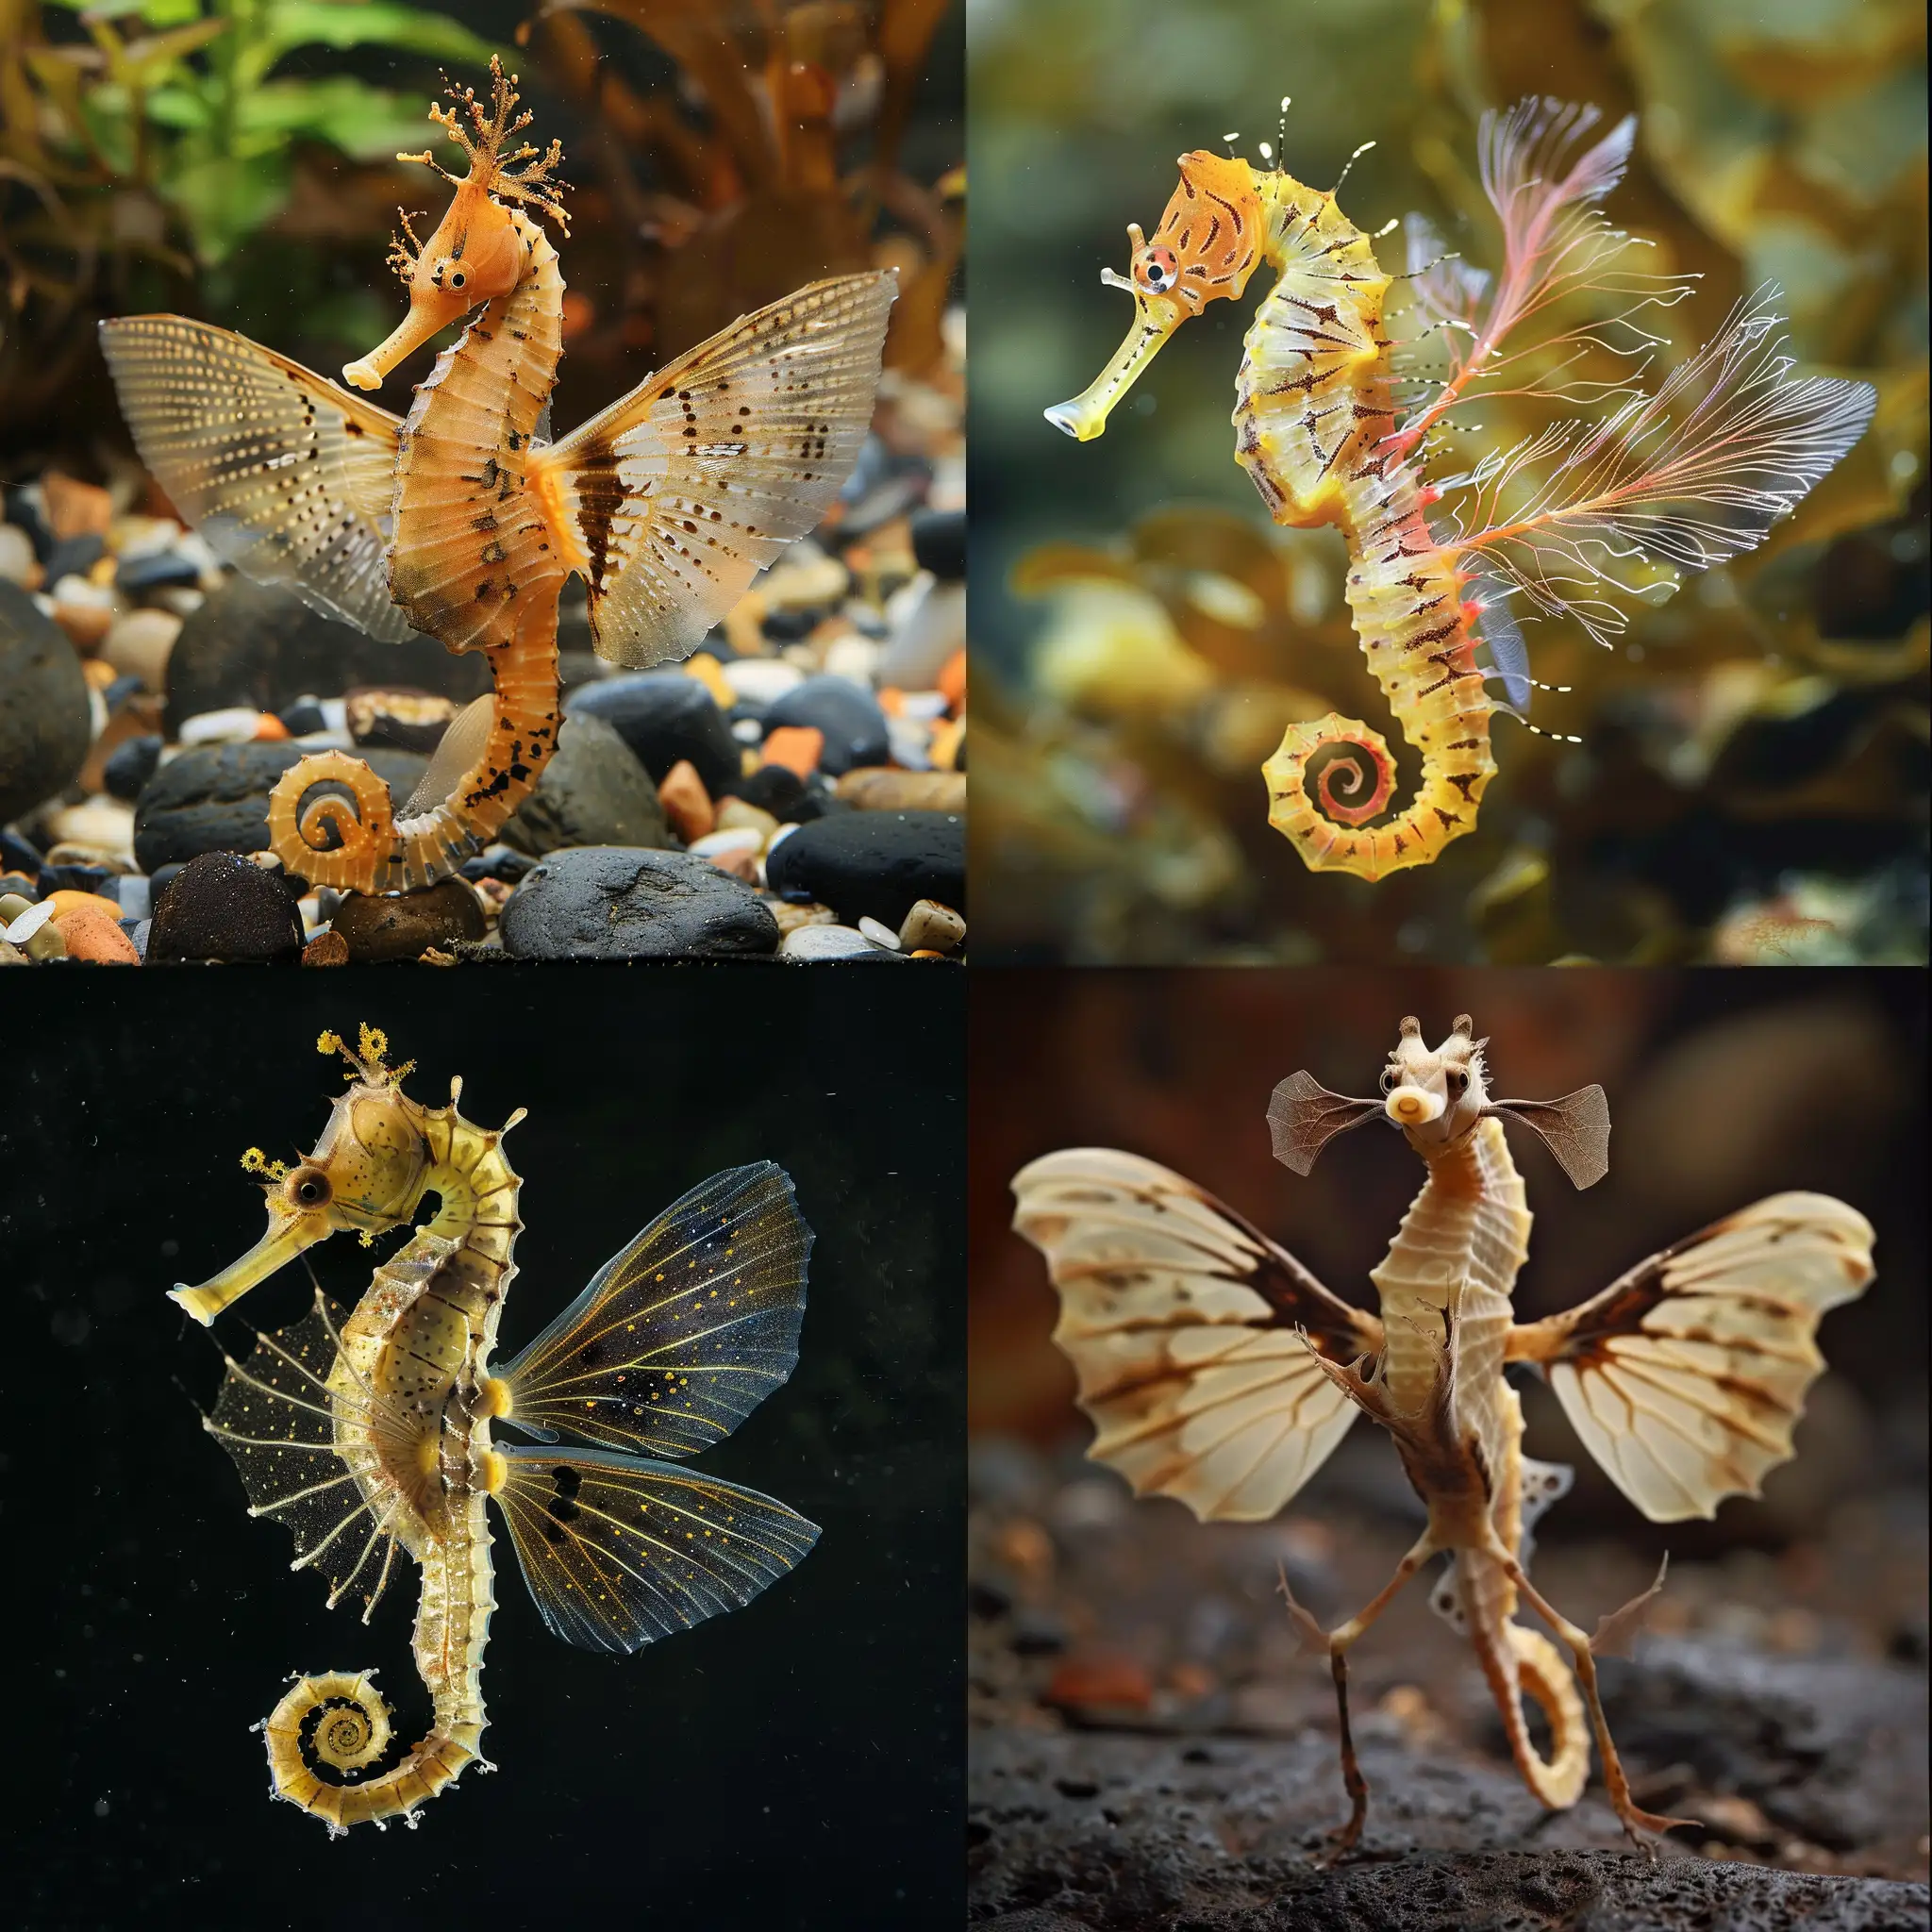 Full body shot, photo of animal known
as seafly( hybrid of seahorse with
butterfly wings), national geographic
style --style raw